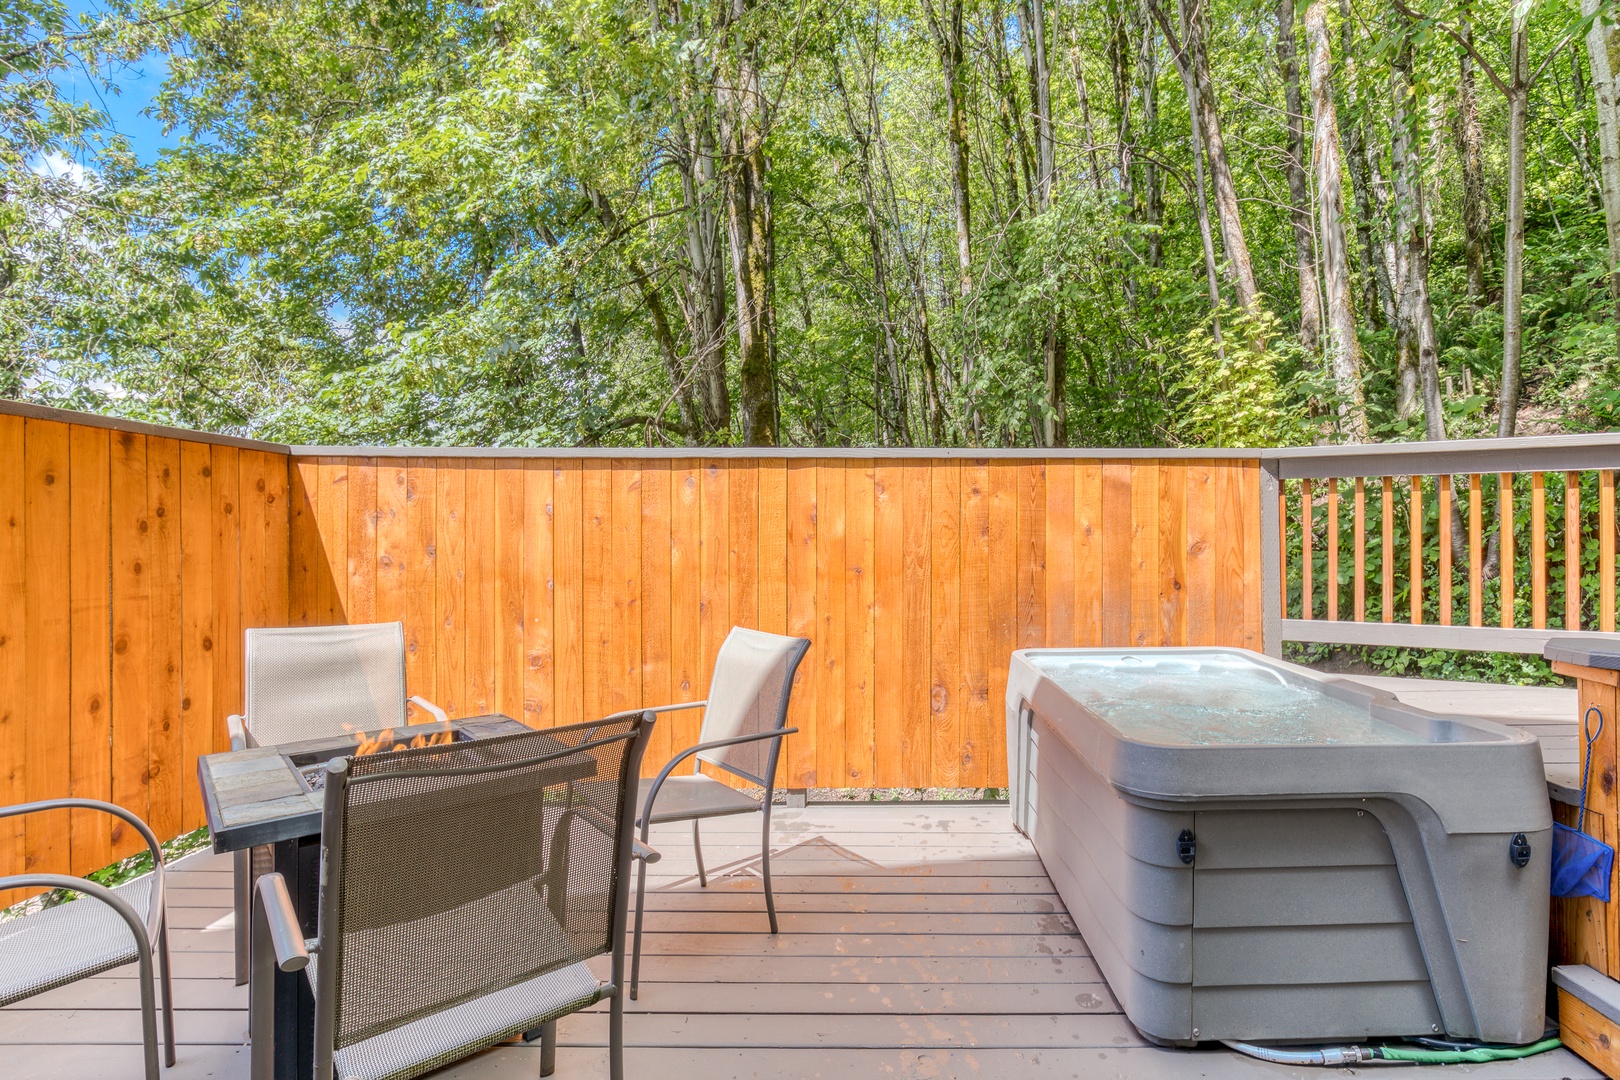 Clackamas Vacation Rentals, Duck Crossing - Take a dip in the hot tub or take seat around the fire